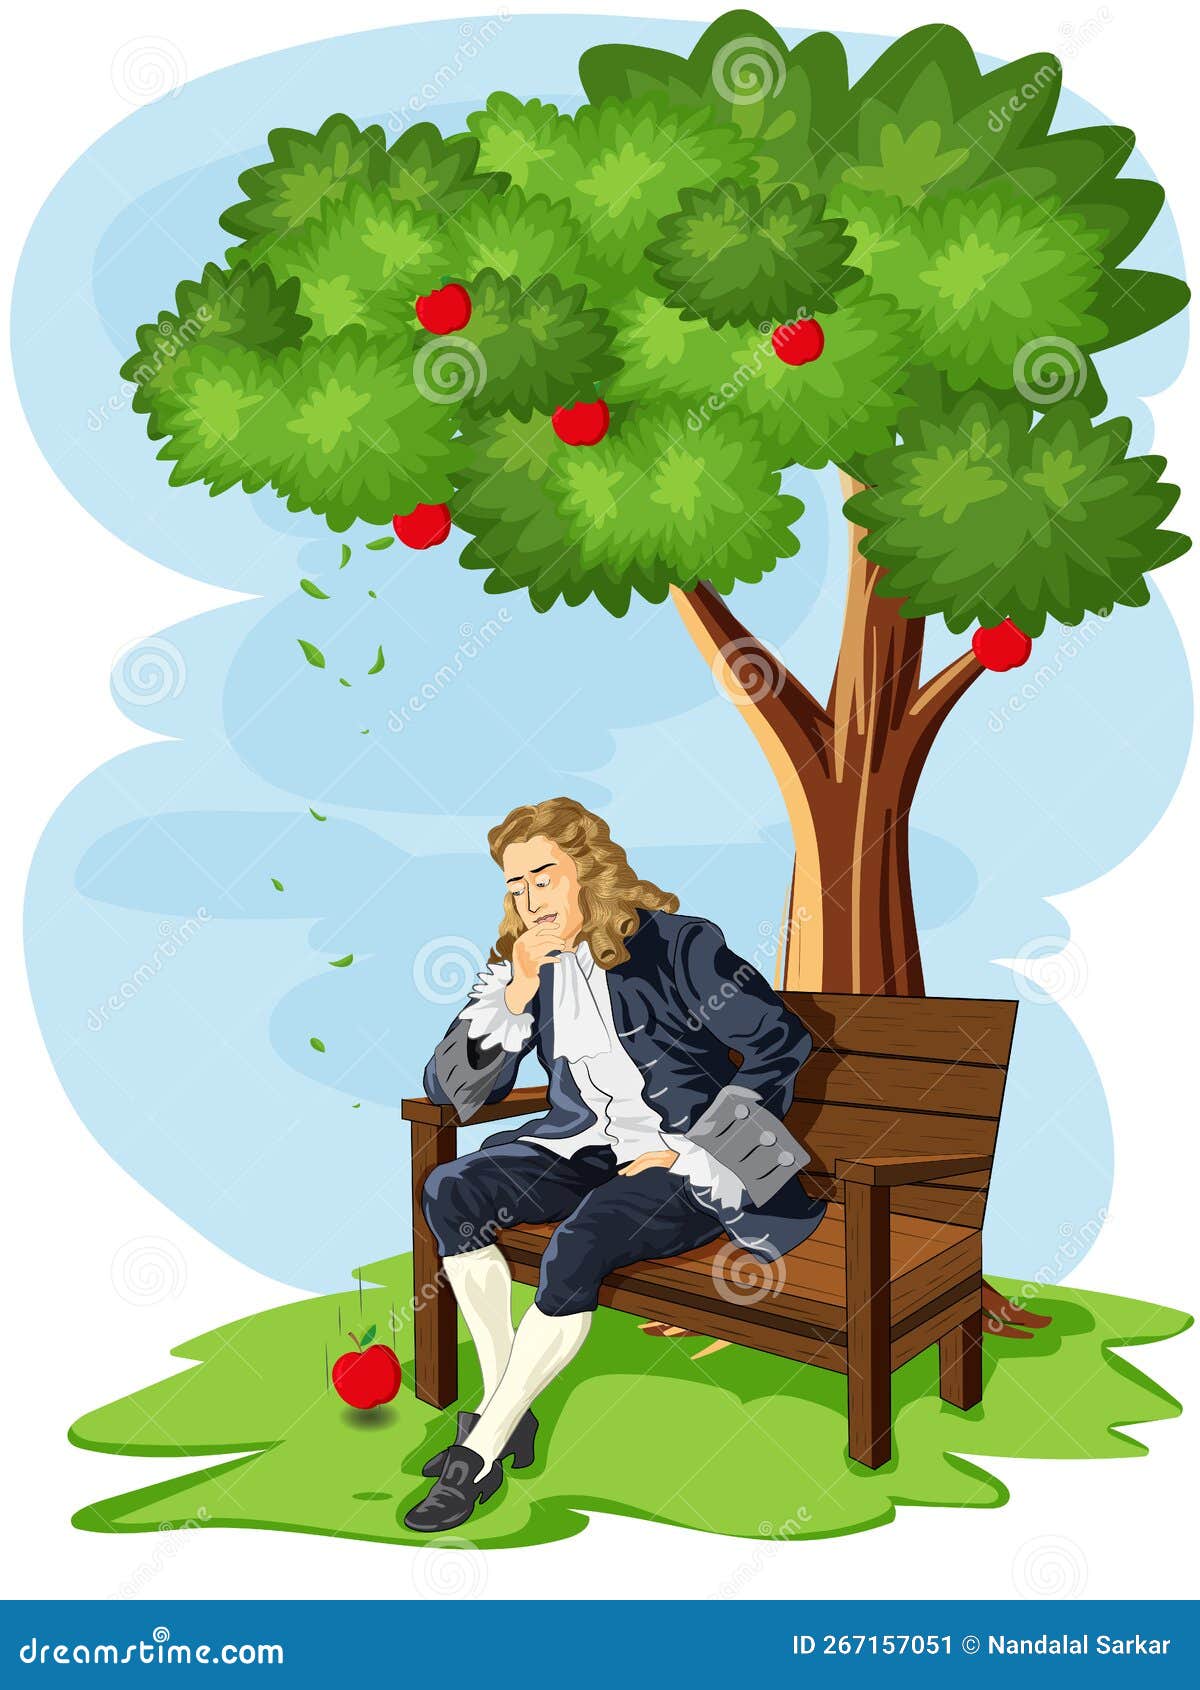 Isaac Newton observing an apple fall to the ground while seated